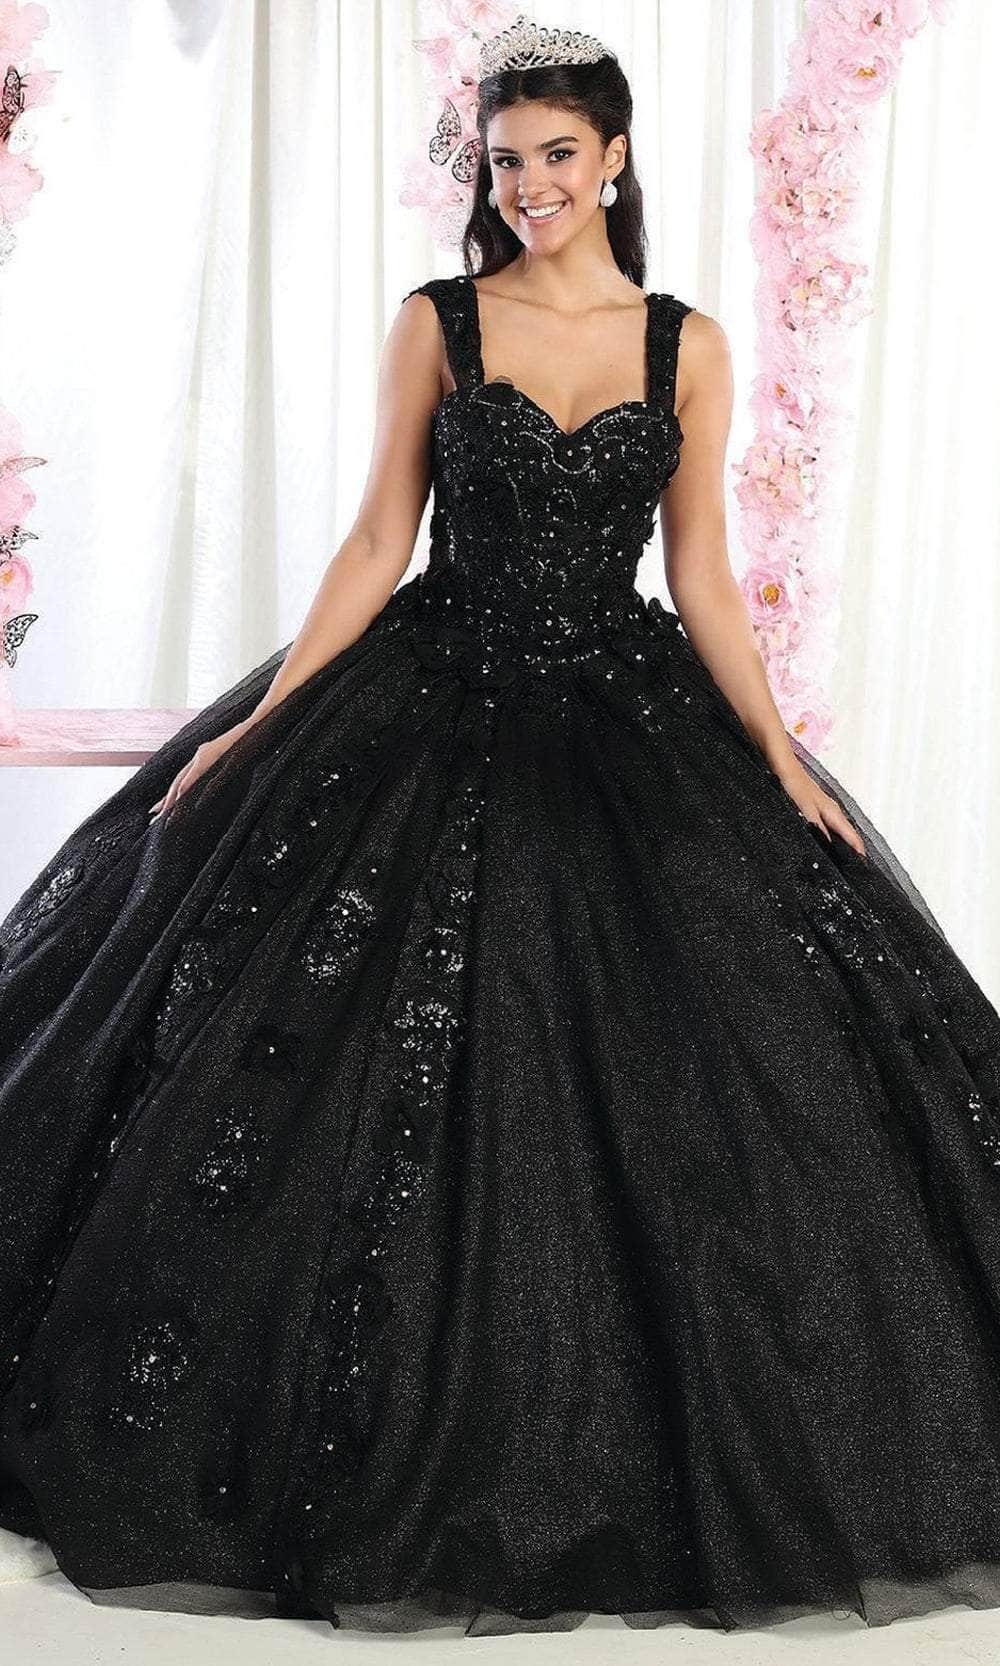 Image of May Queen LK171 - Wide Strap Floral Glitter Ballgown